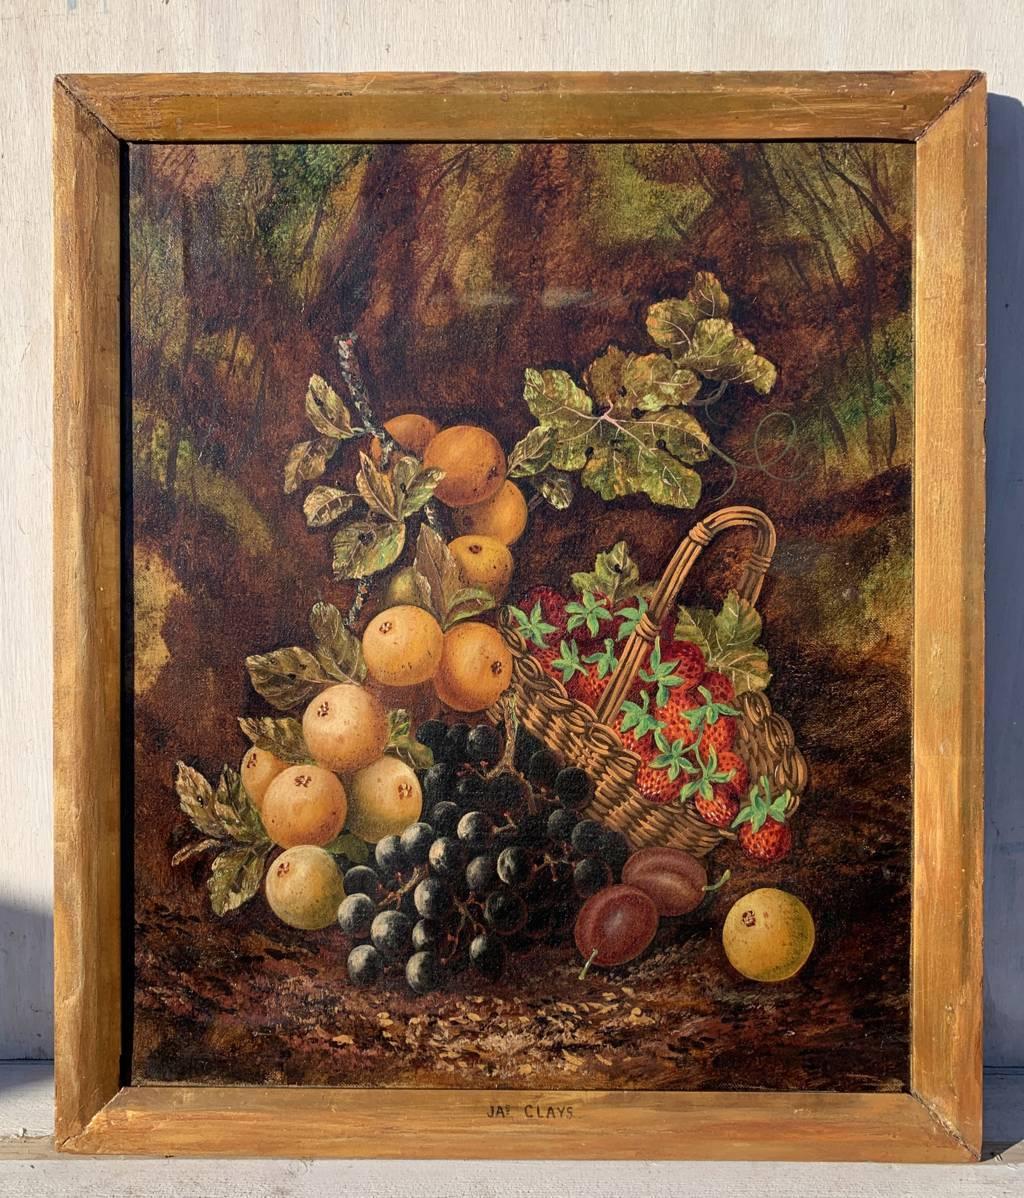 J. Clays (British painter) - 19th century Still Life painting - Fruits - Painting by  J. Clays